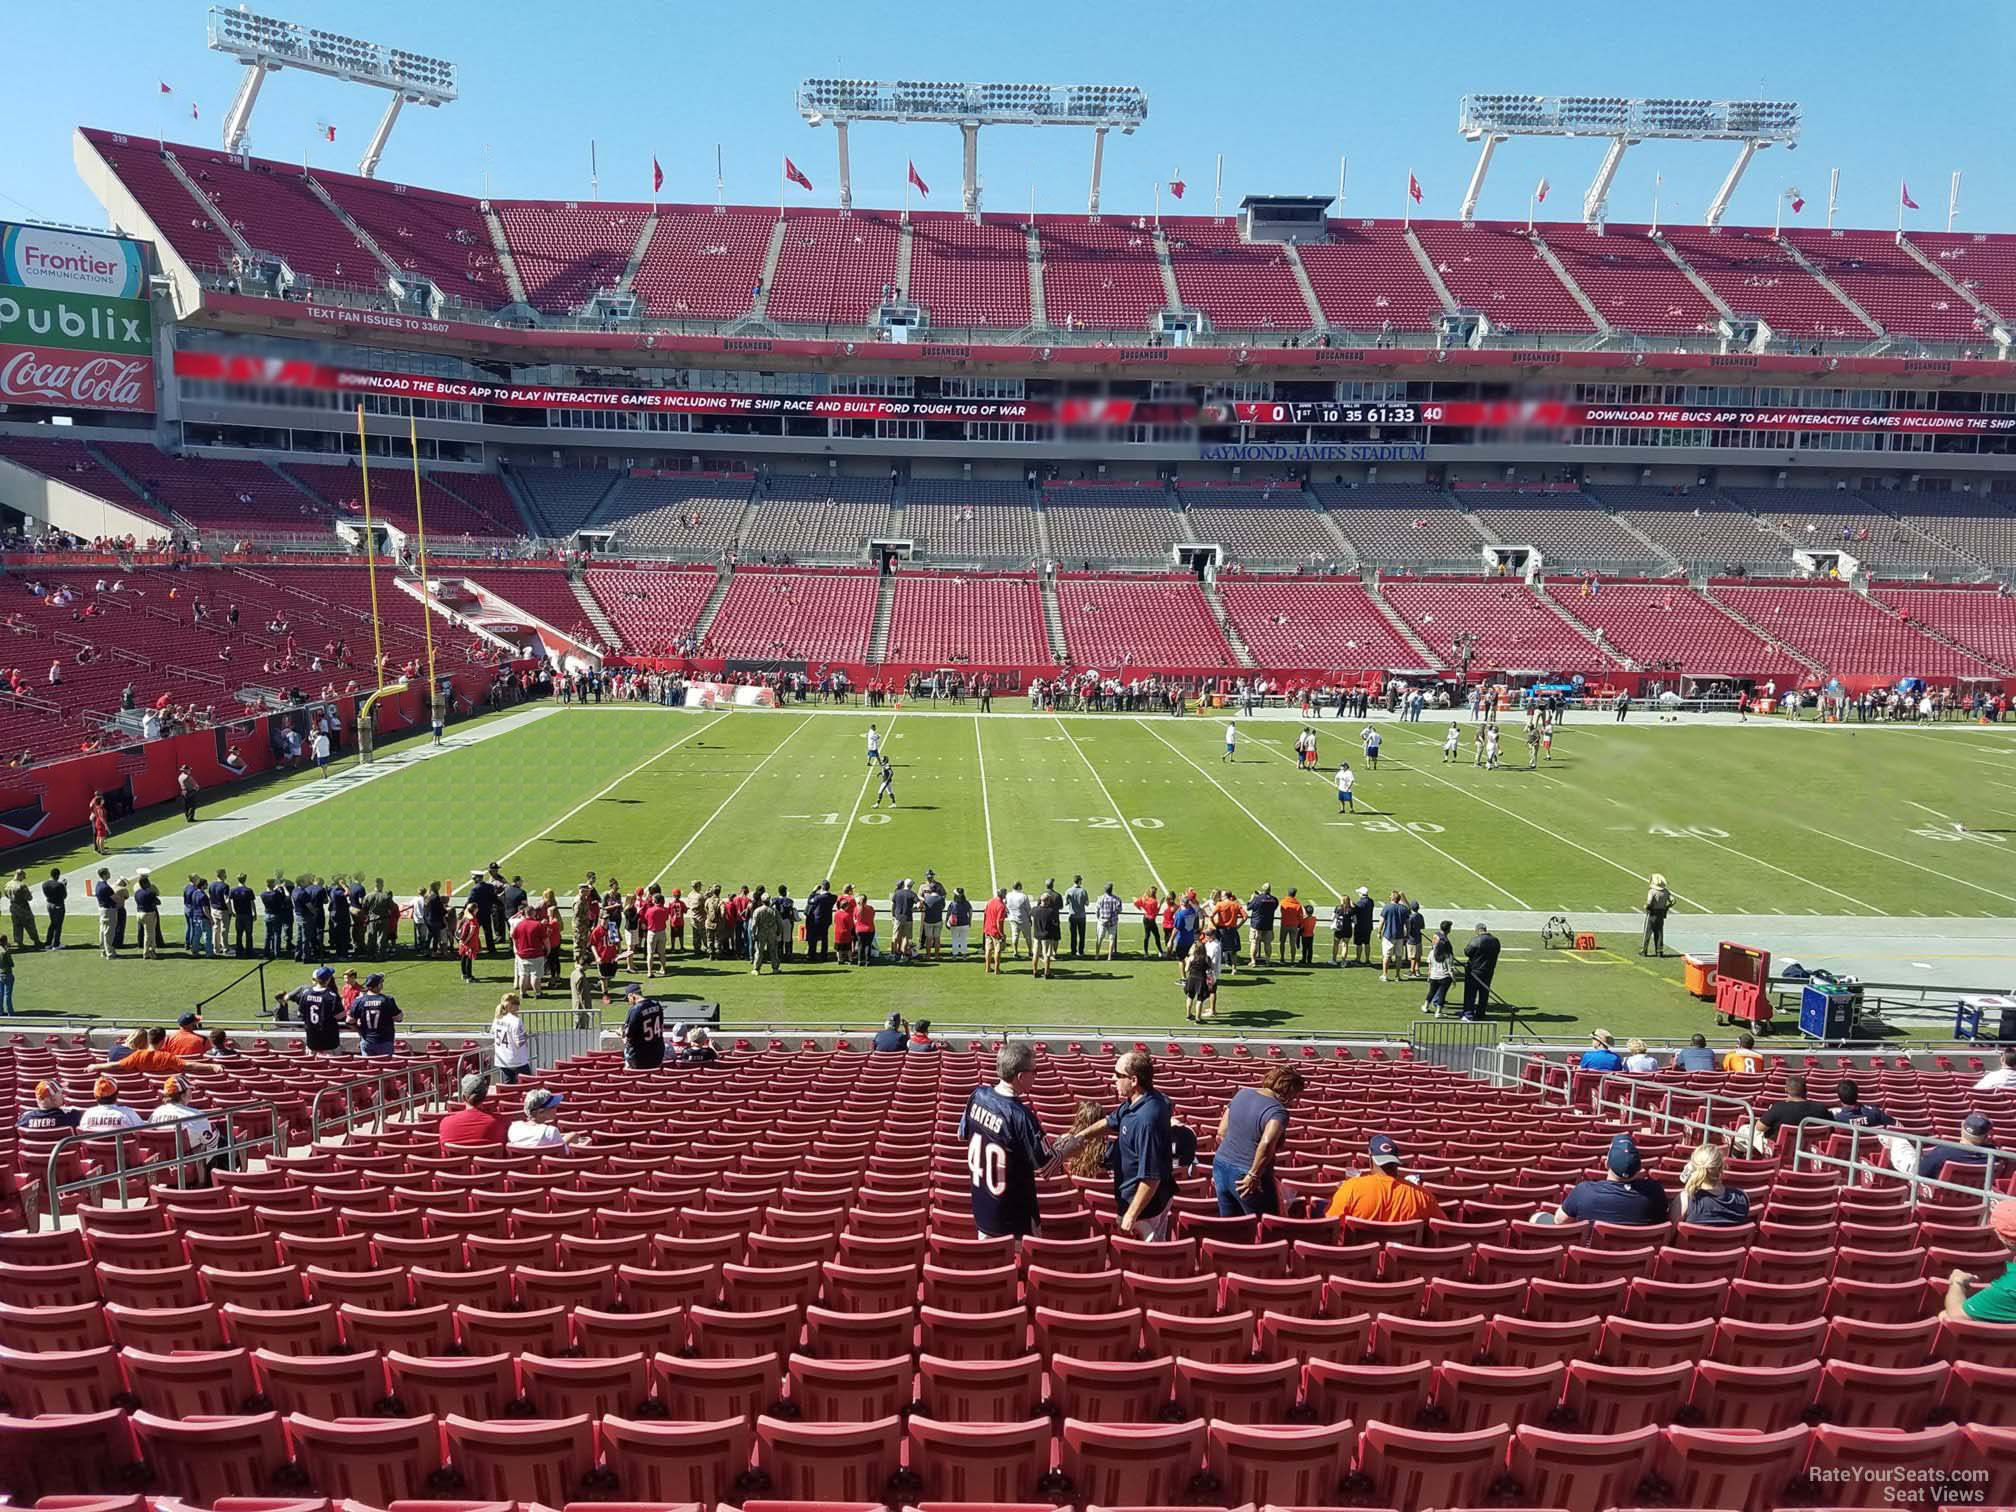 section 133, row wc seat view  for football - raymond james stadium